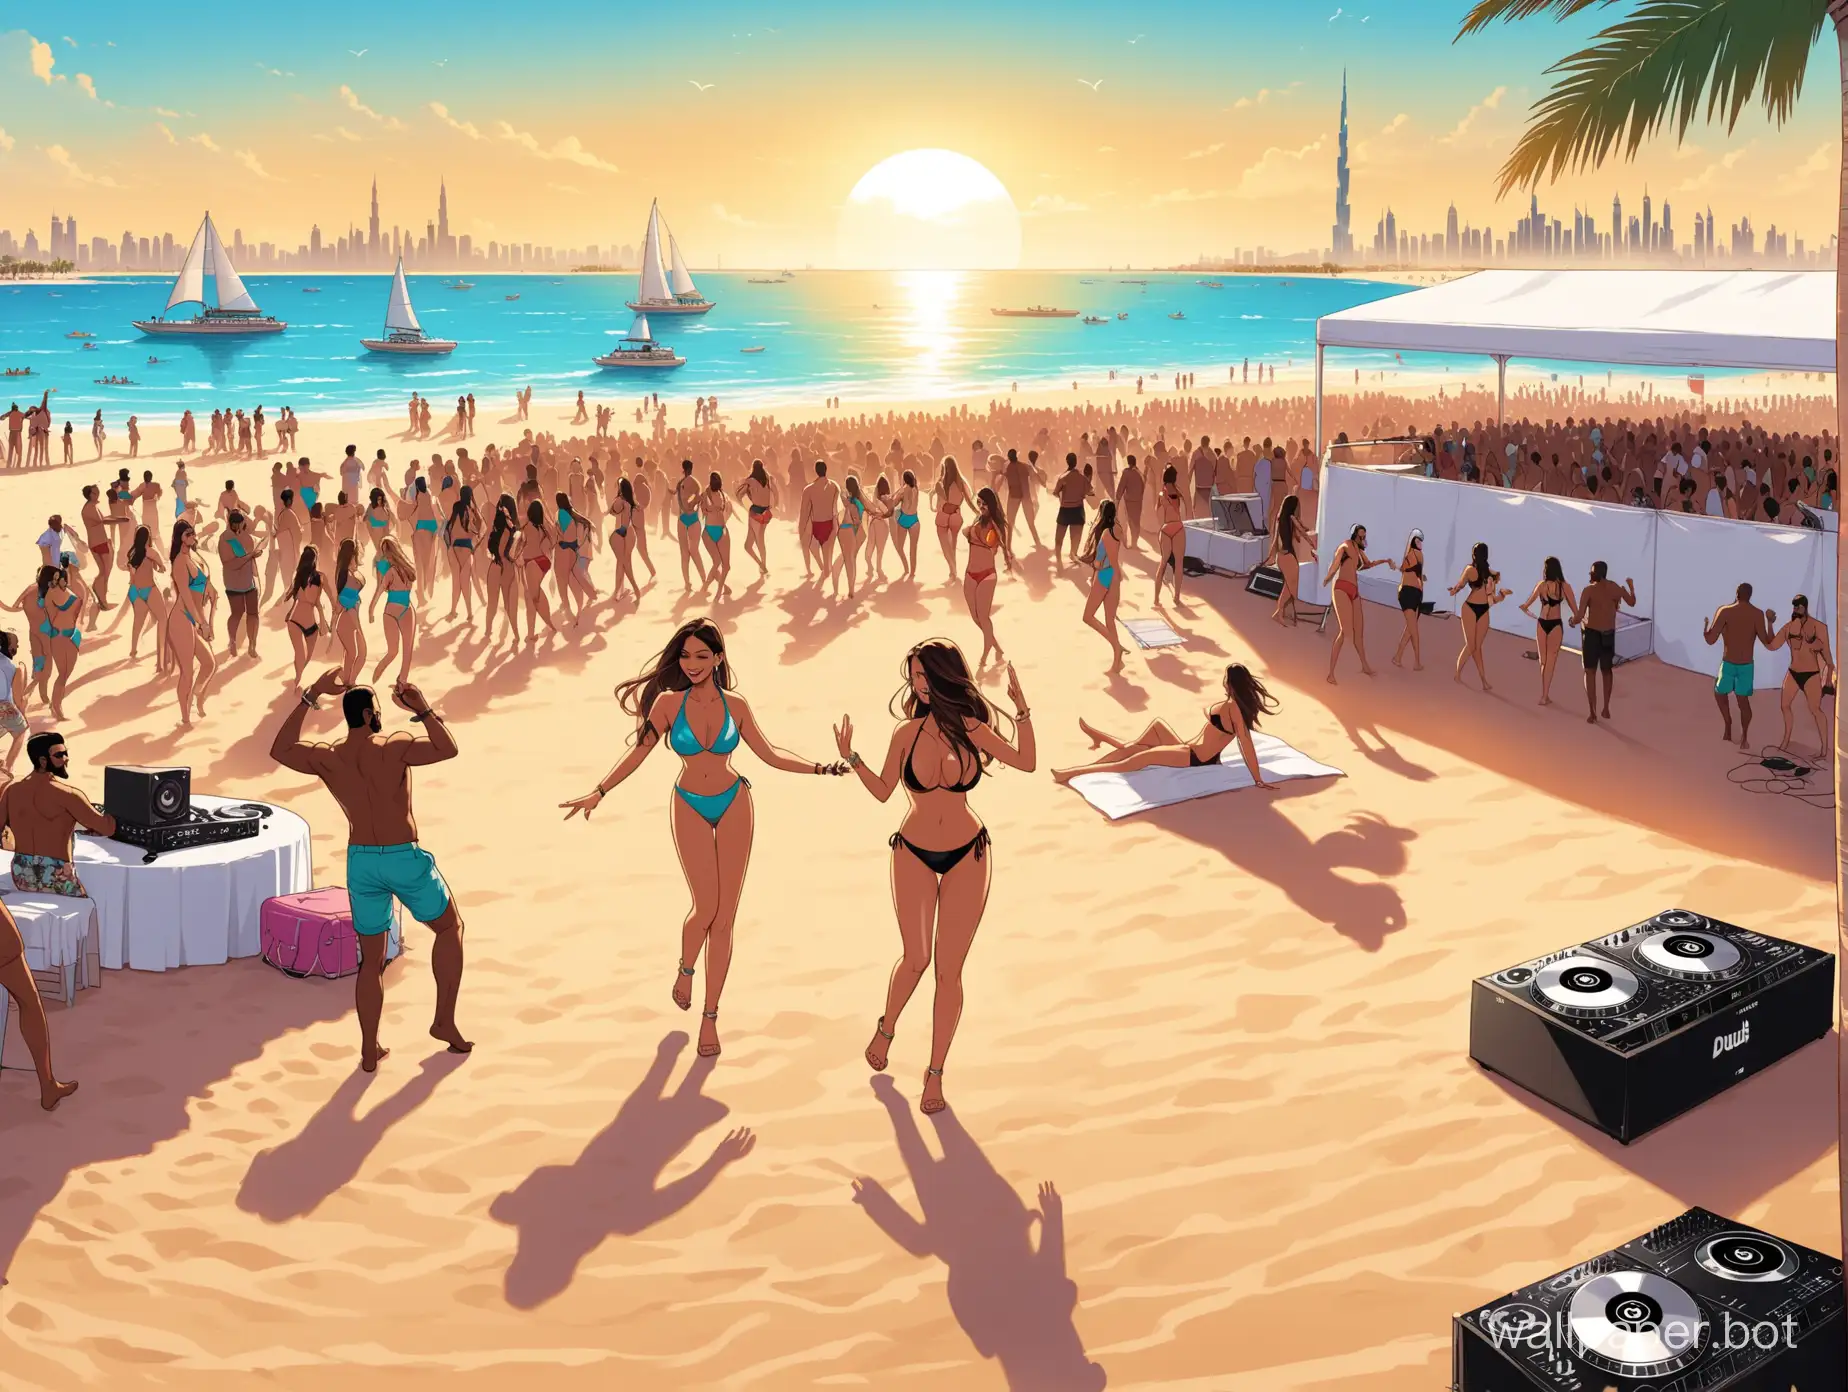 Sizzling-Dubai-Beach-Party-with-DJ-and-Relaxed-Revellers-in-Stylish-Beachwear